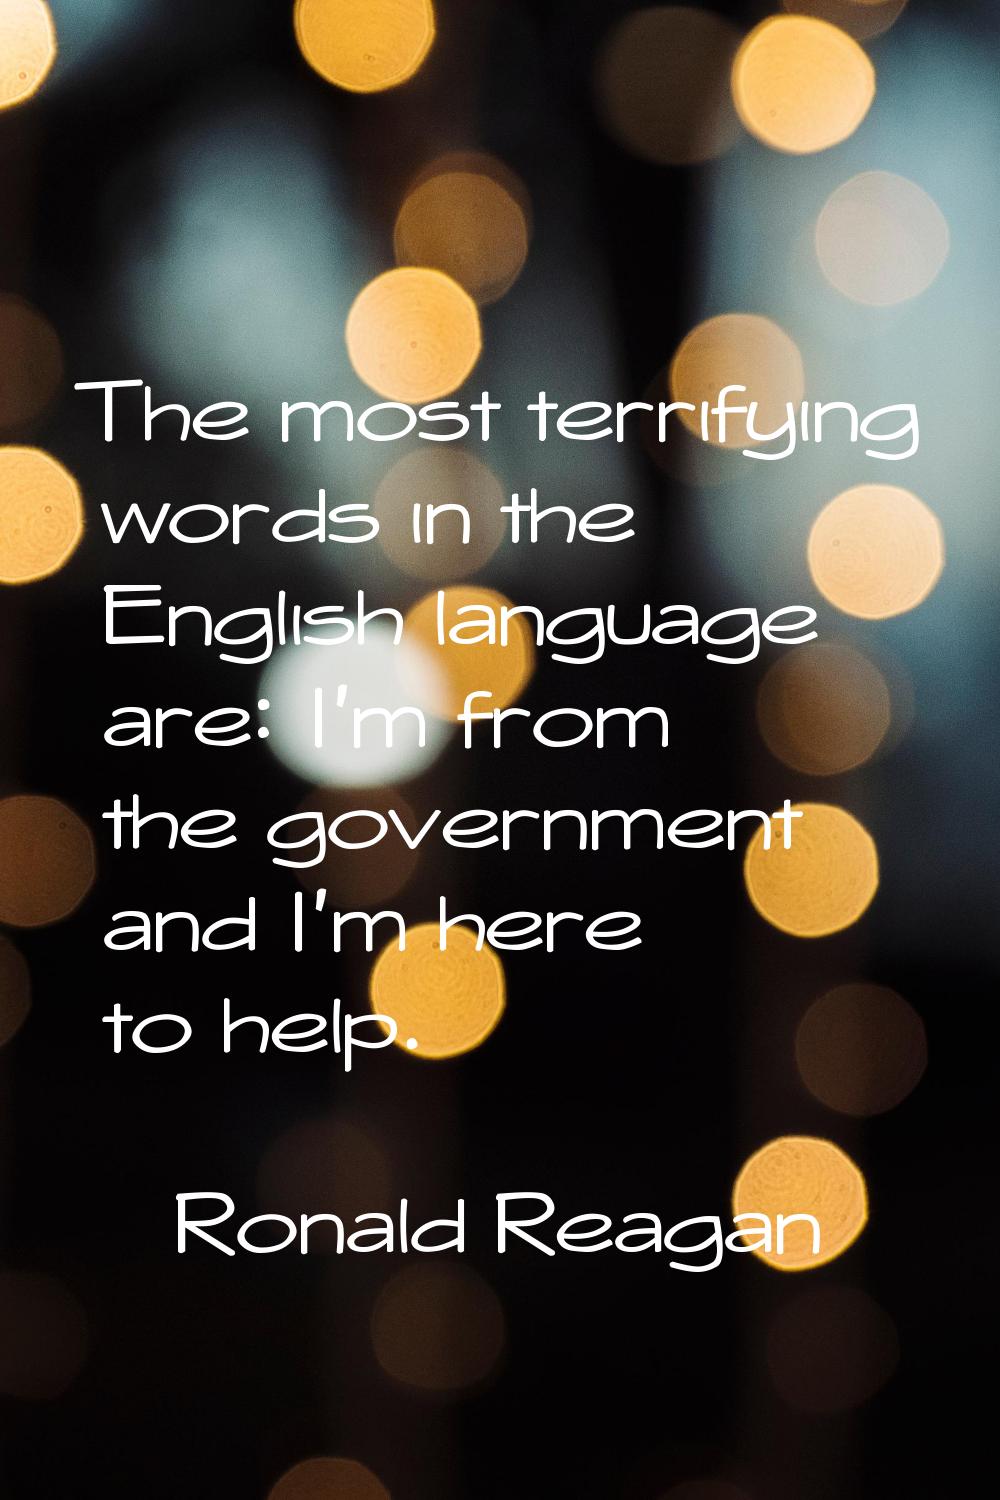 The most terrifying words in the English language are: I'm from the government and I'm here to help